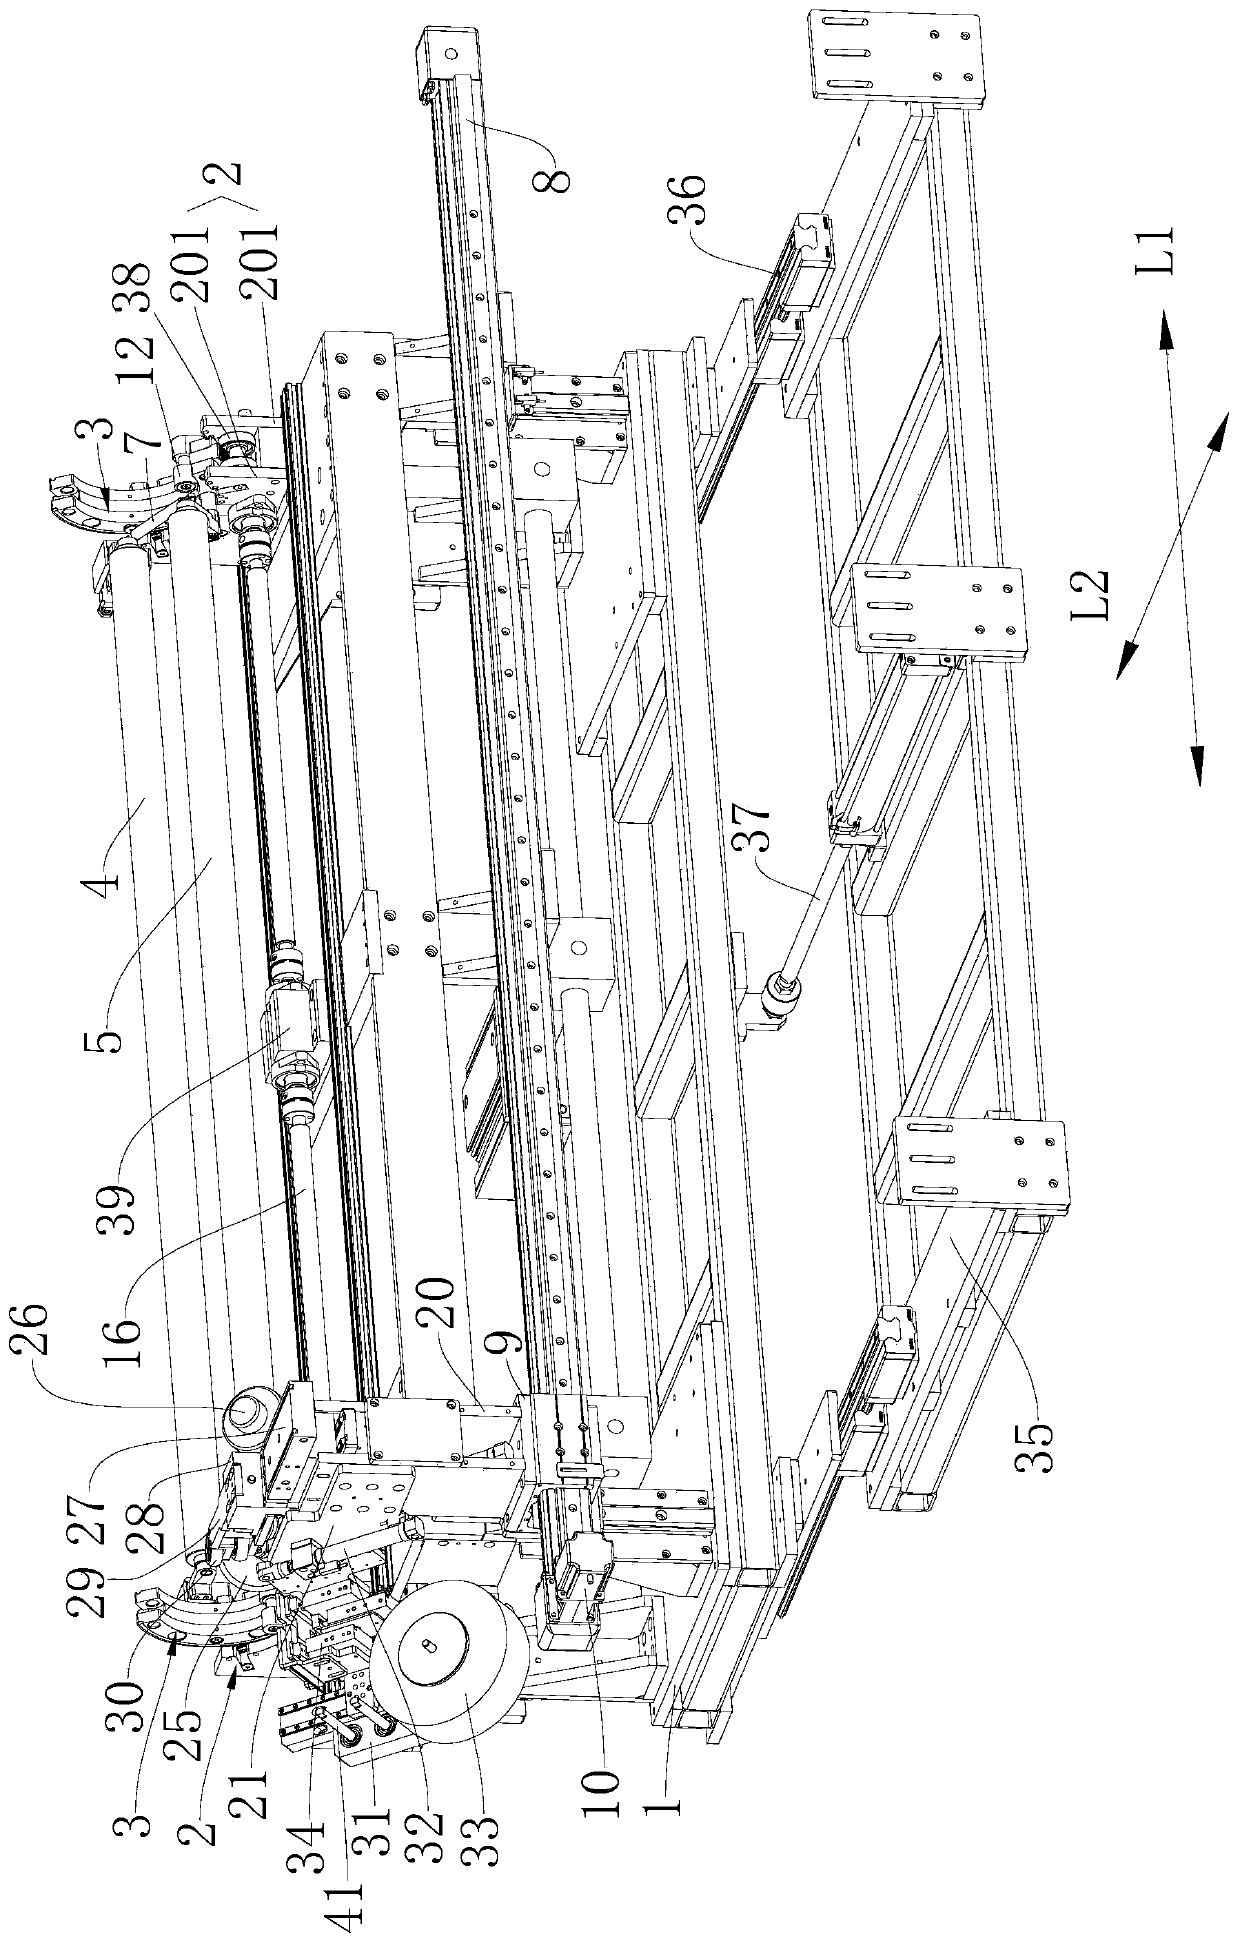 Device for controlling tension during production of flexible materials